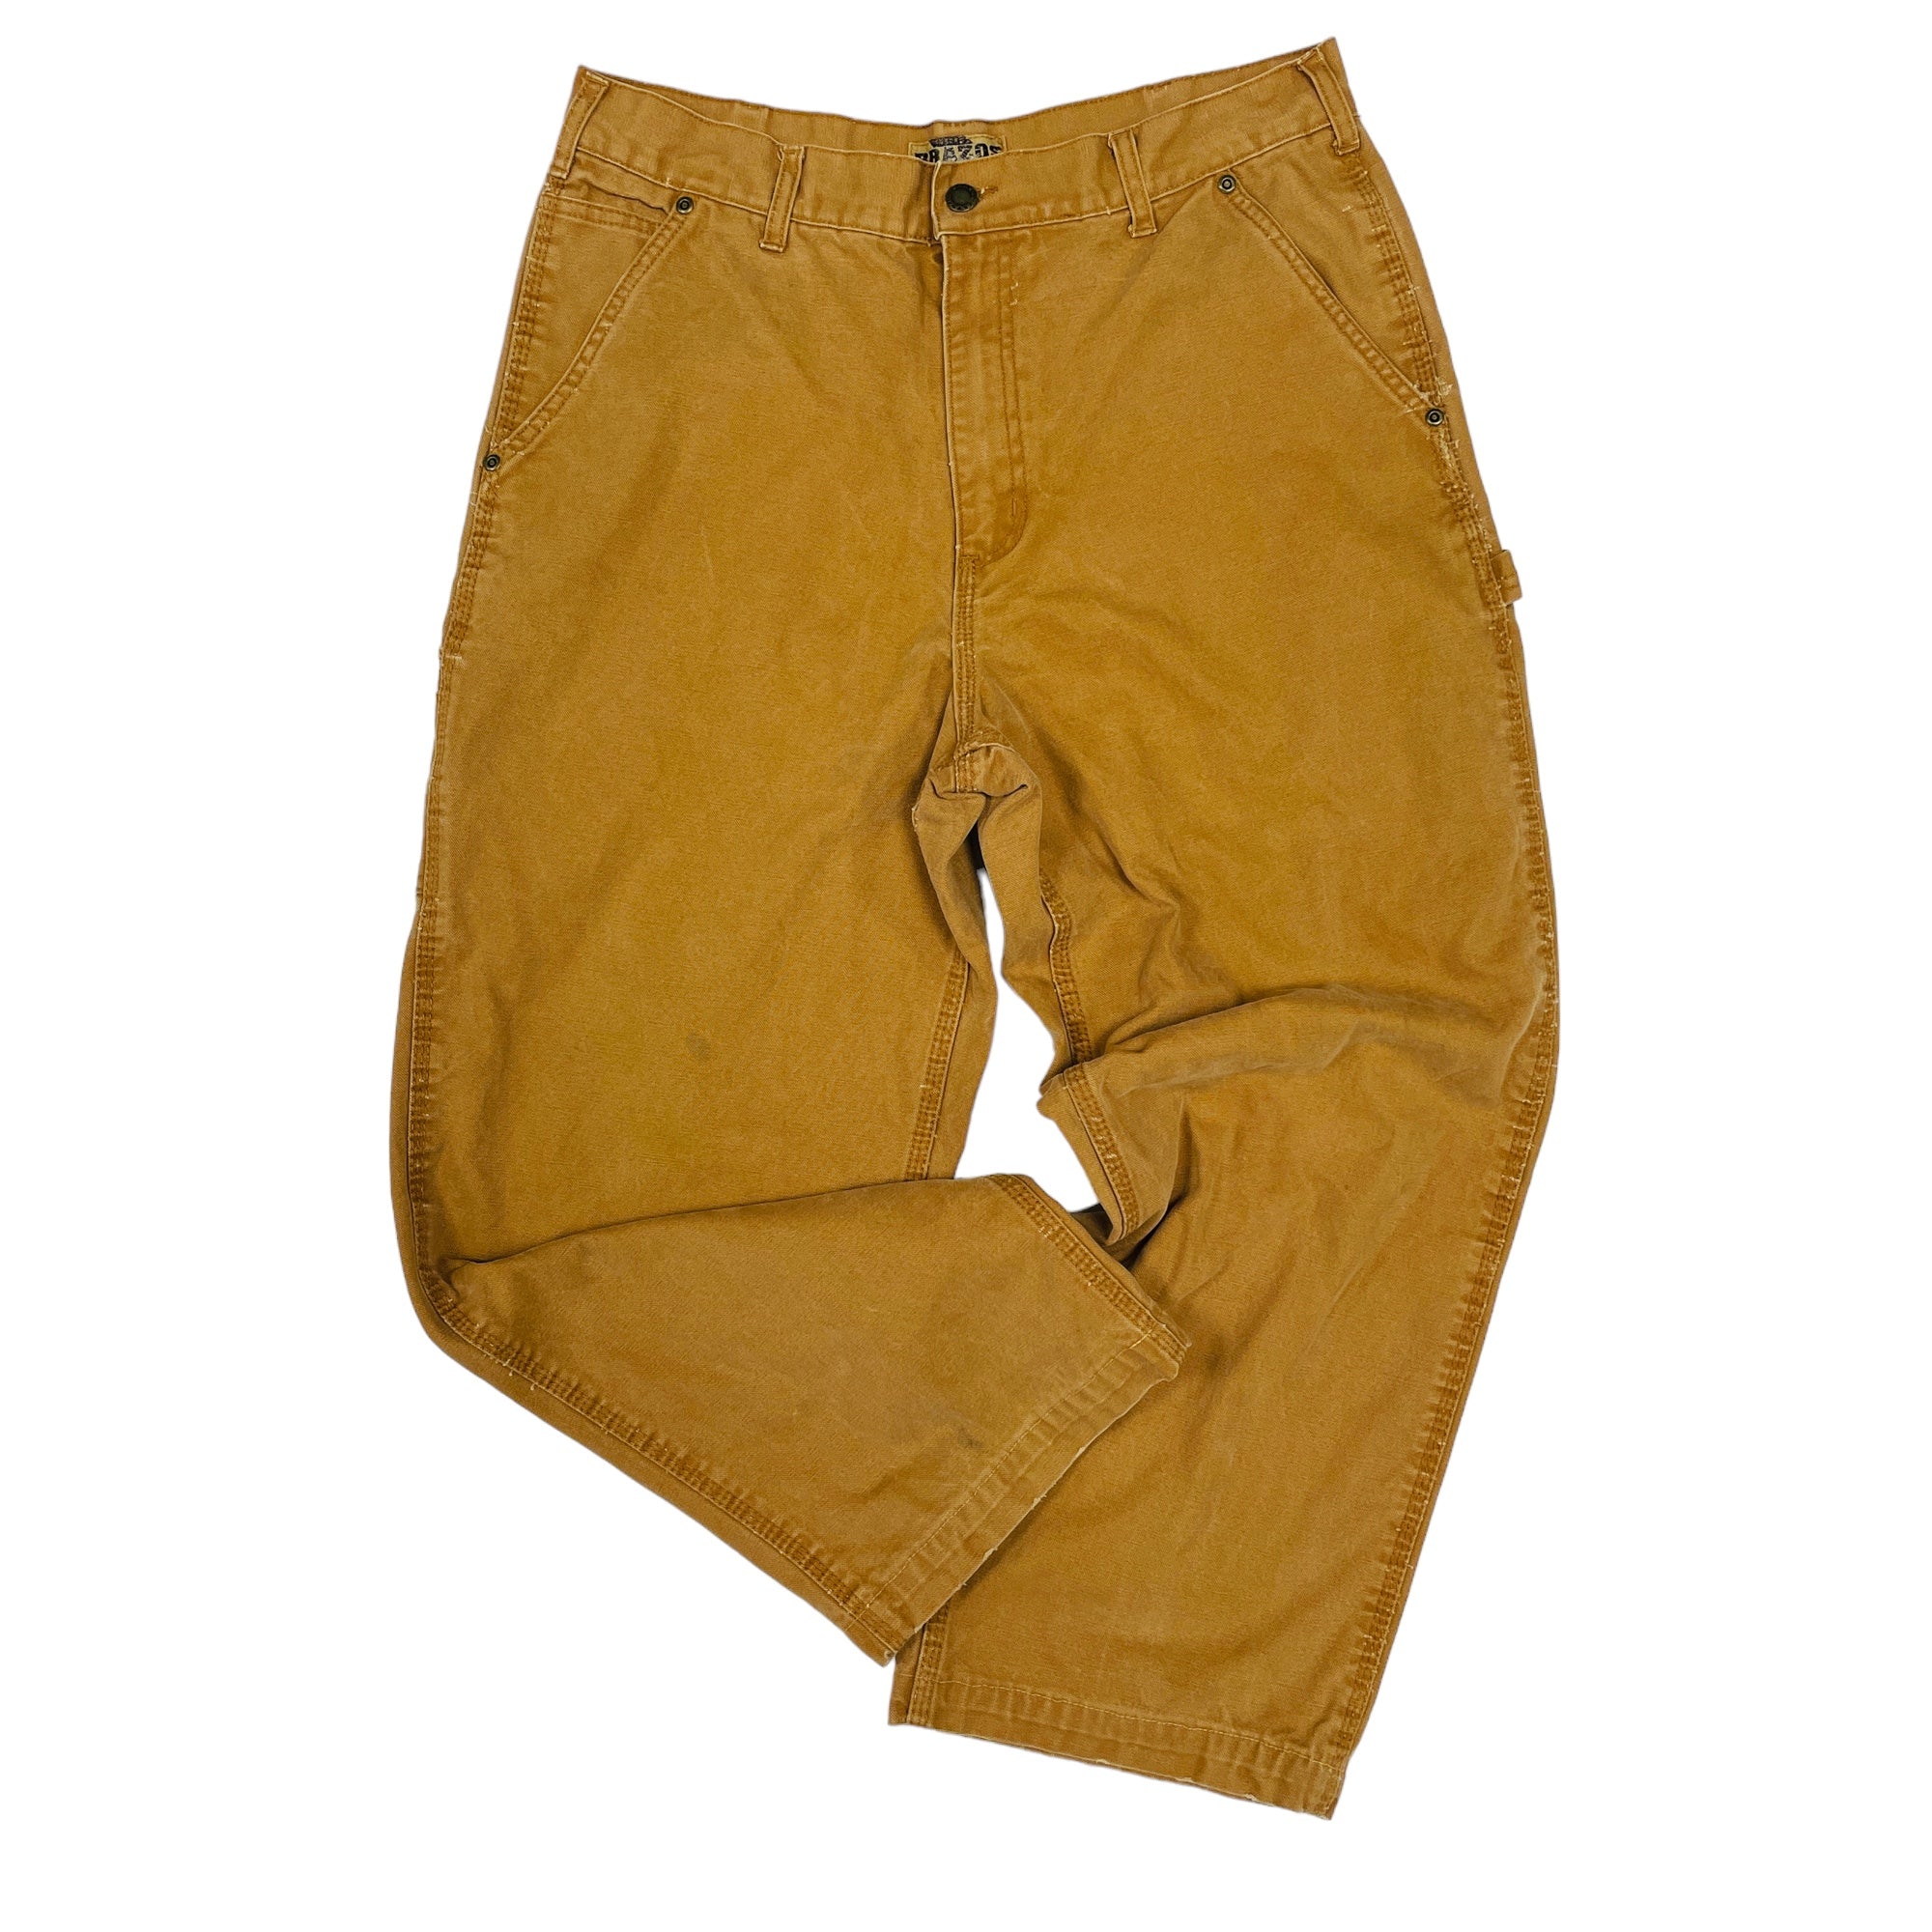 Buy Gap Carpenter Trousers from the Gap online shop